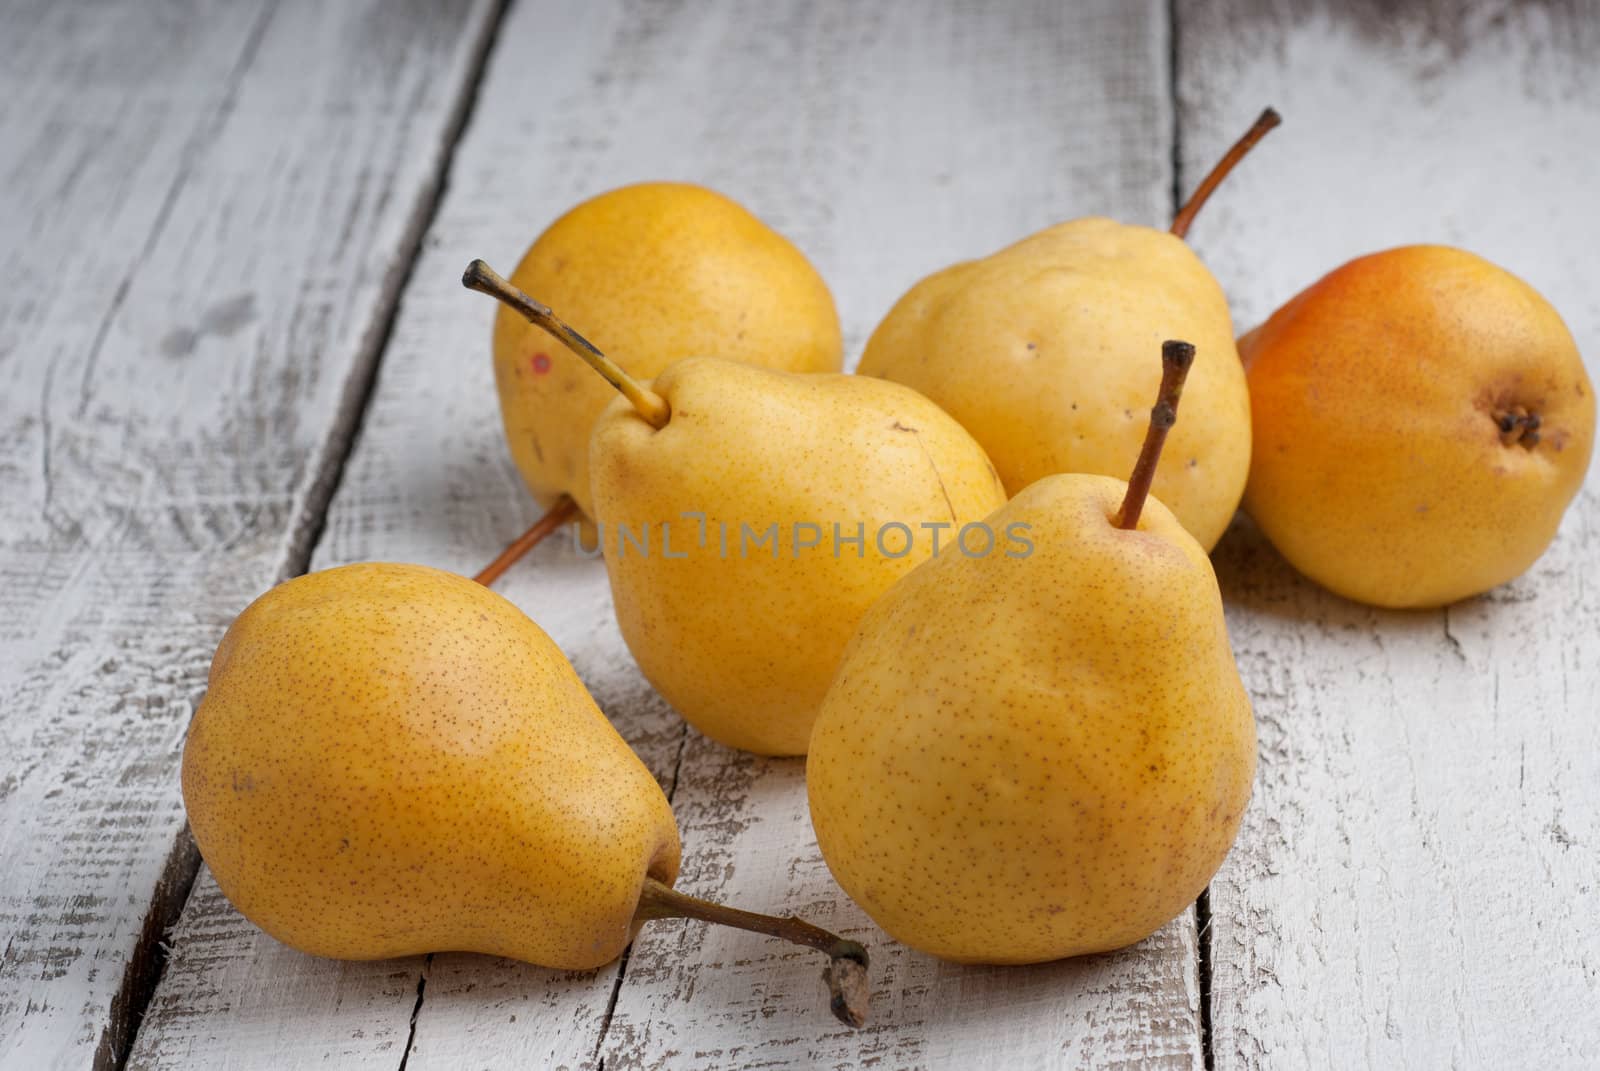 Yellow pears on a wooden table by GennadiyShel